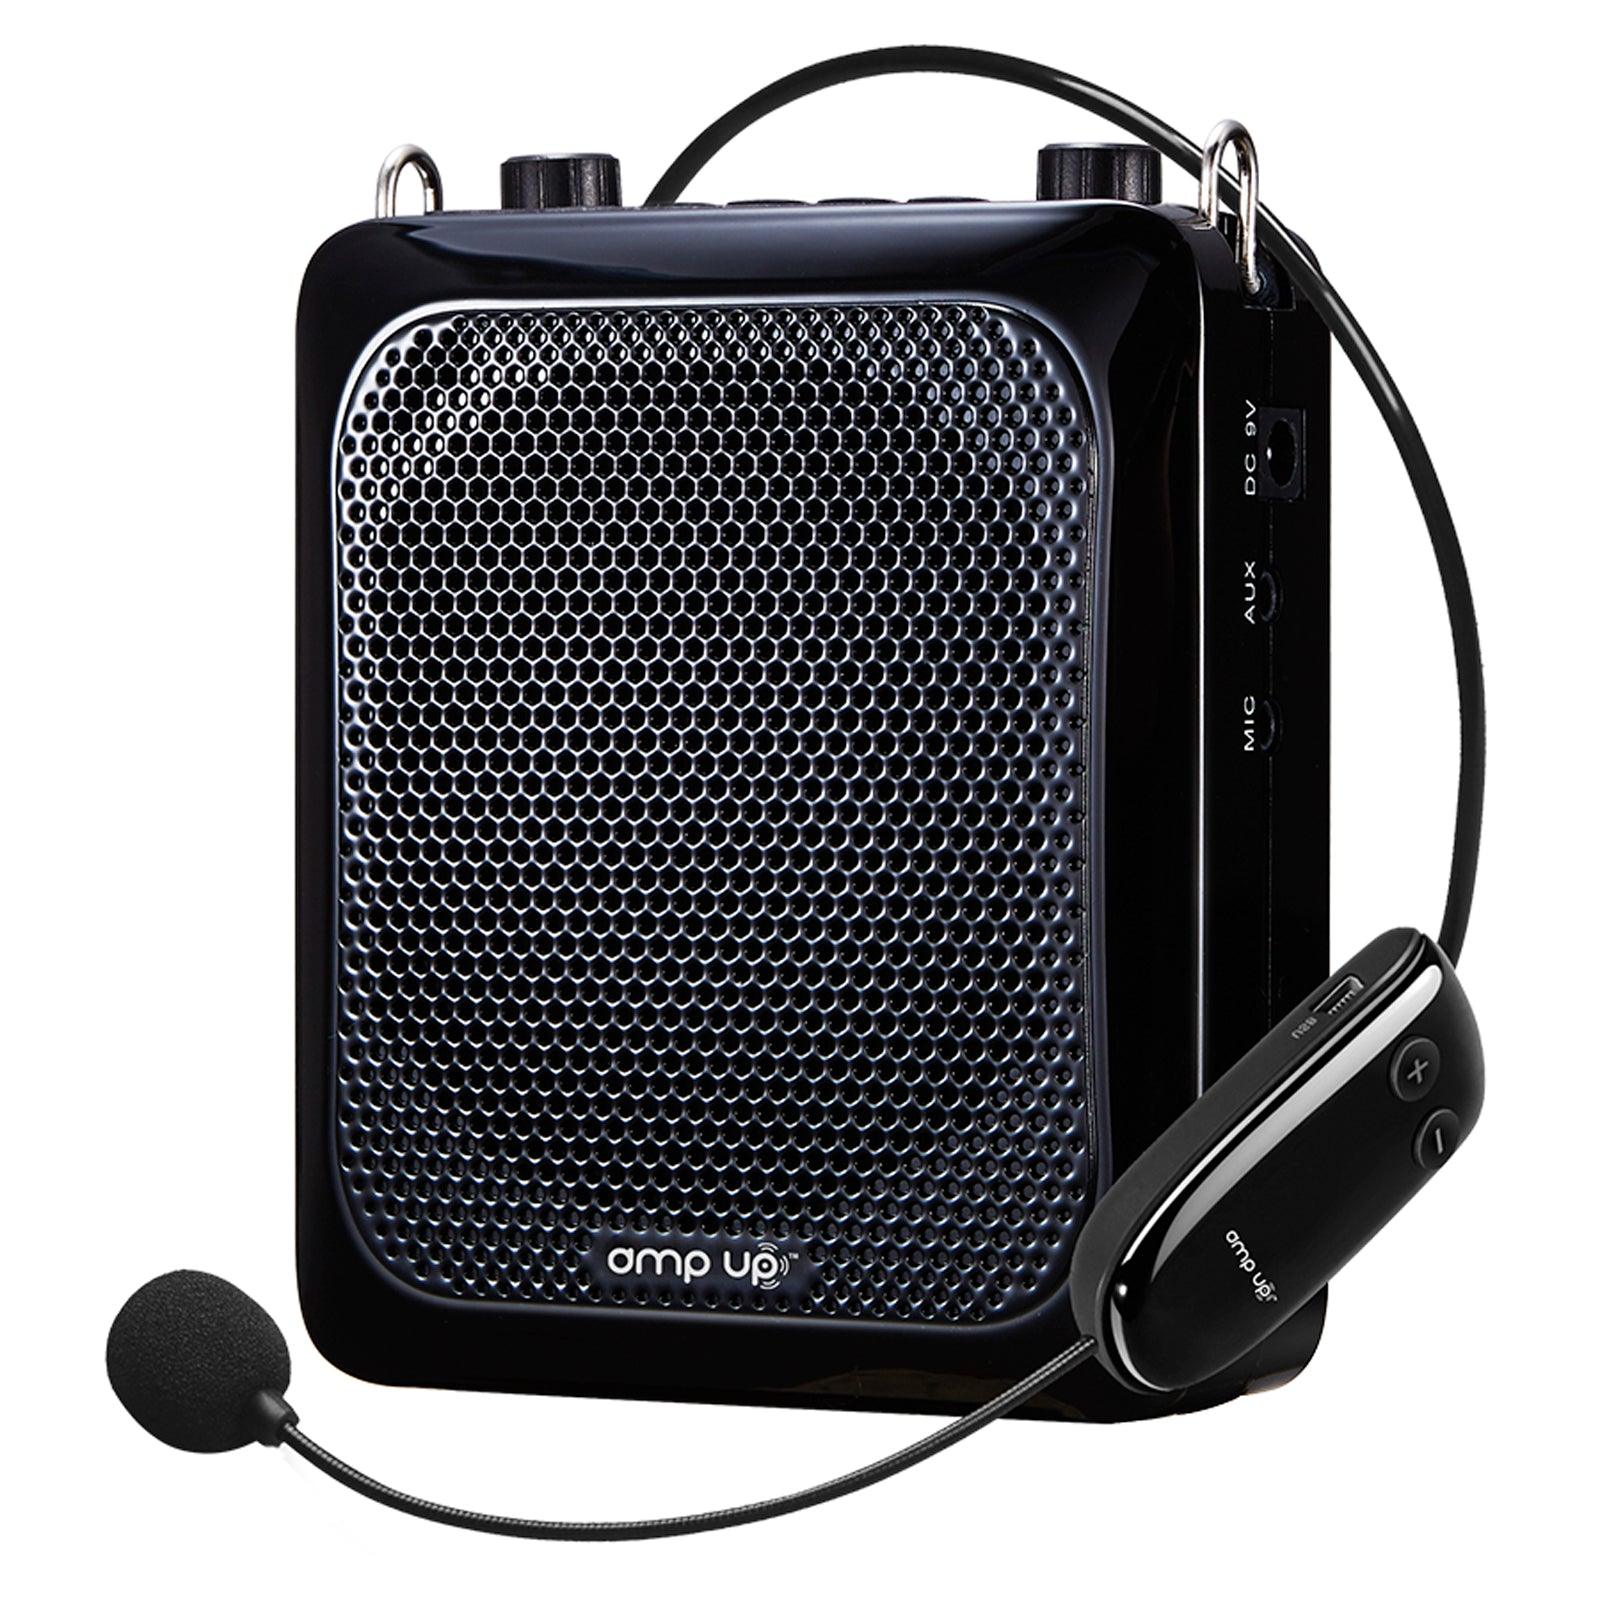 Amp-Up™ Personal UHF Voice Amplifier with Wireless Microphone – up to 40 Channels without Interference! - Loomini